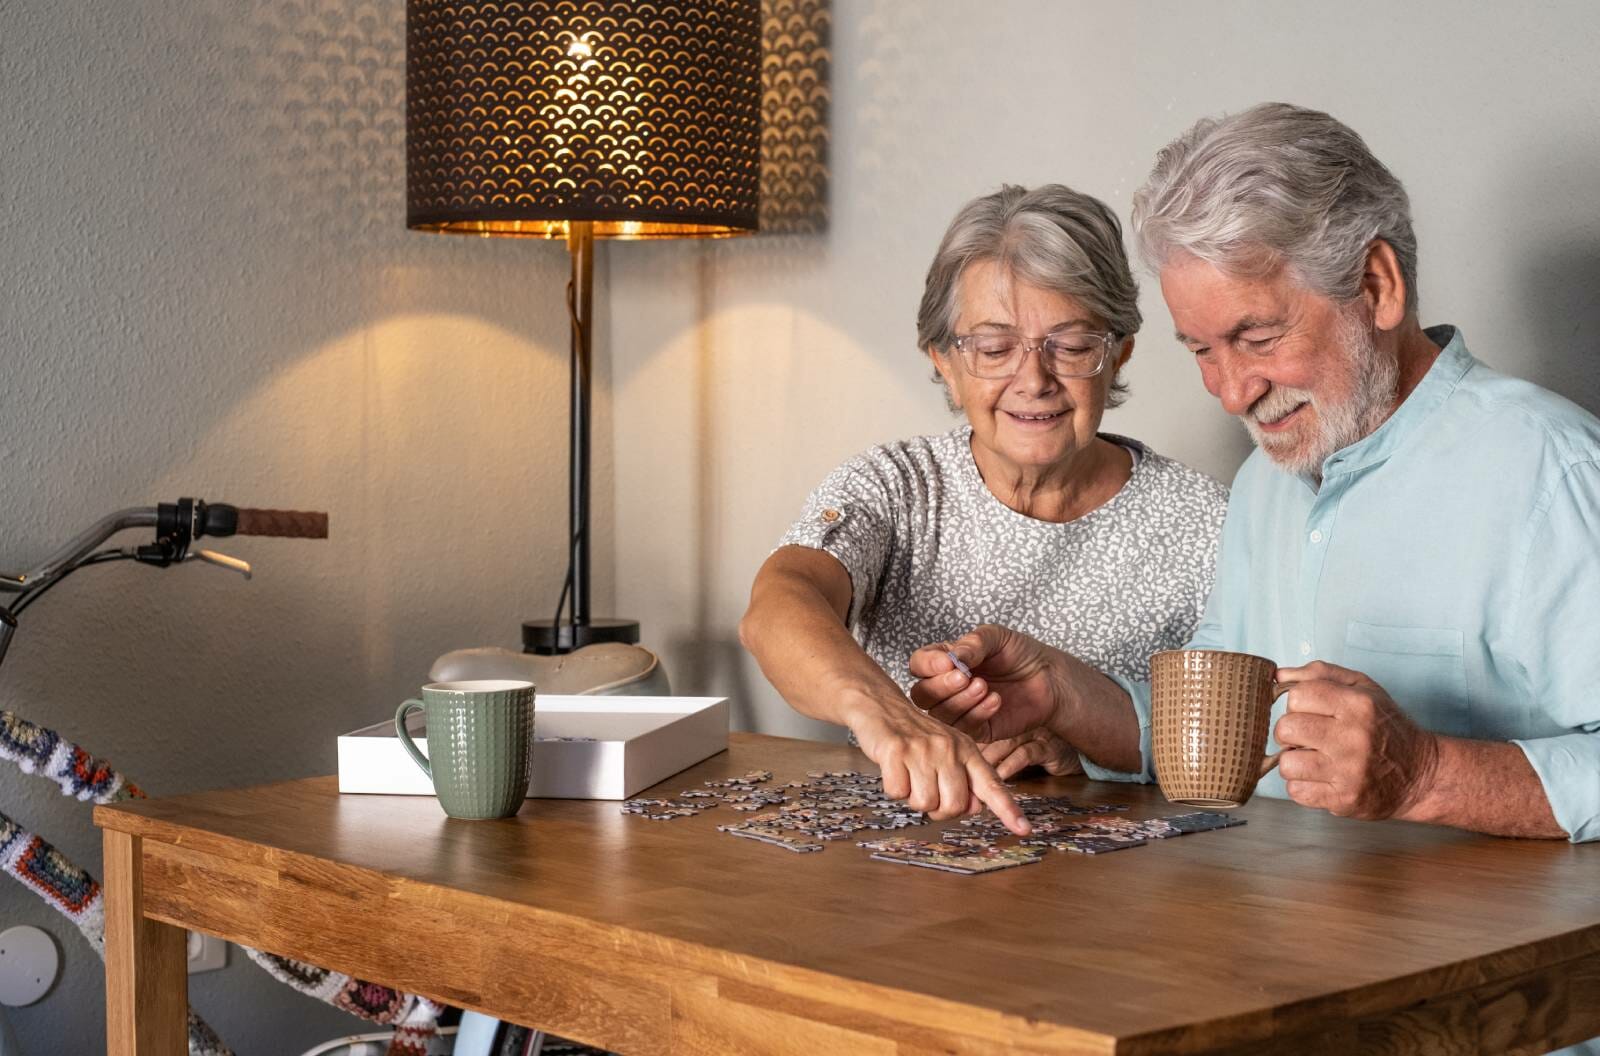 Elderly couple doing a jigsaw puzzle.